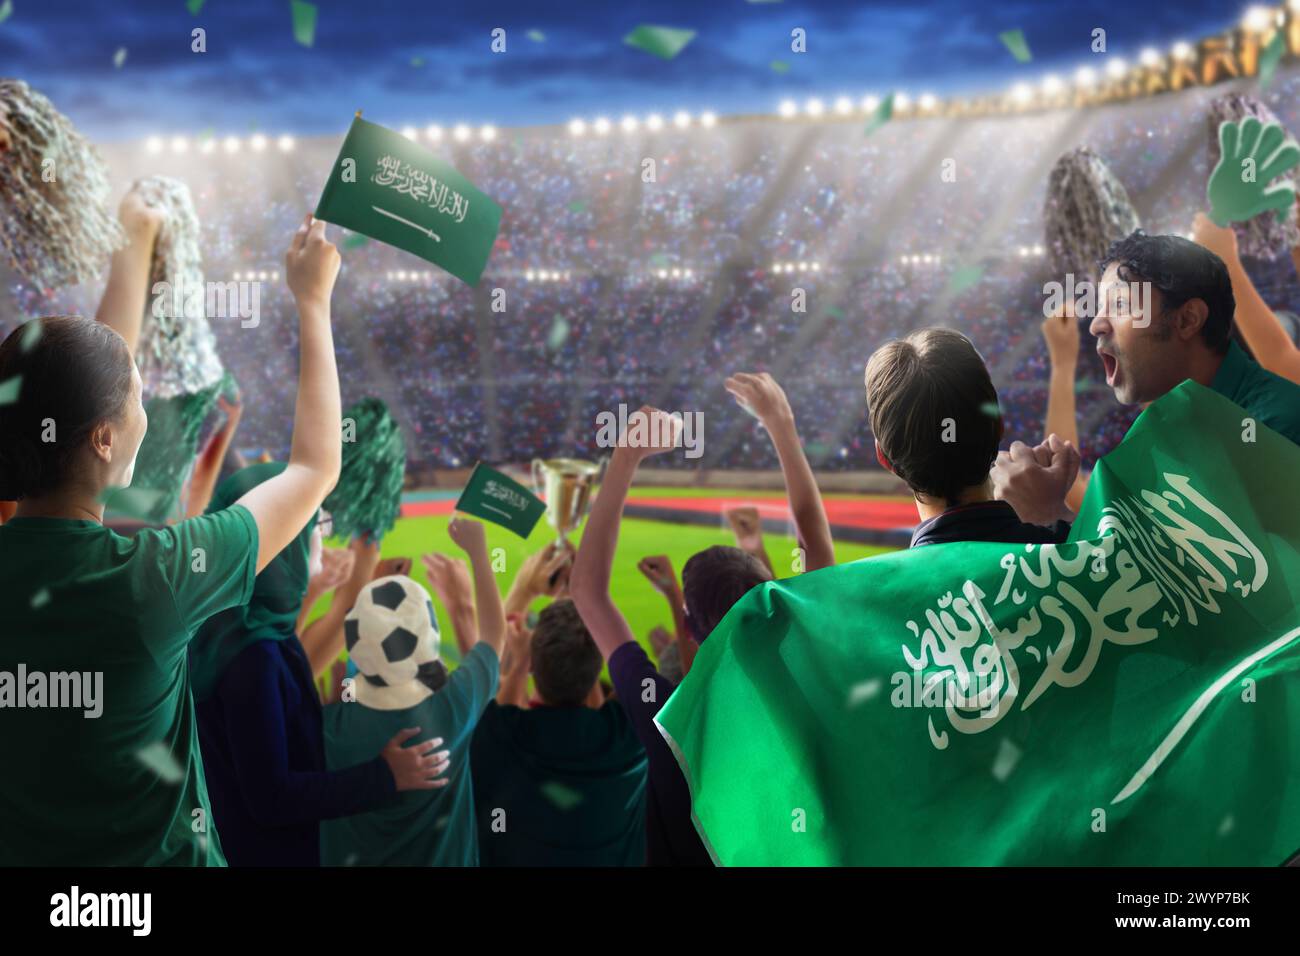 Saudi Arabia football supporter on stadium. Saudi Arabian fans on soccer pitch watching team play. Group of supporters with flag and national jersey Stock Photo